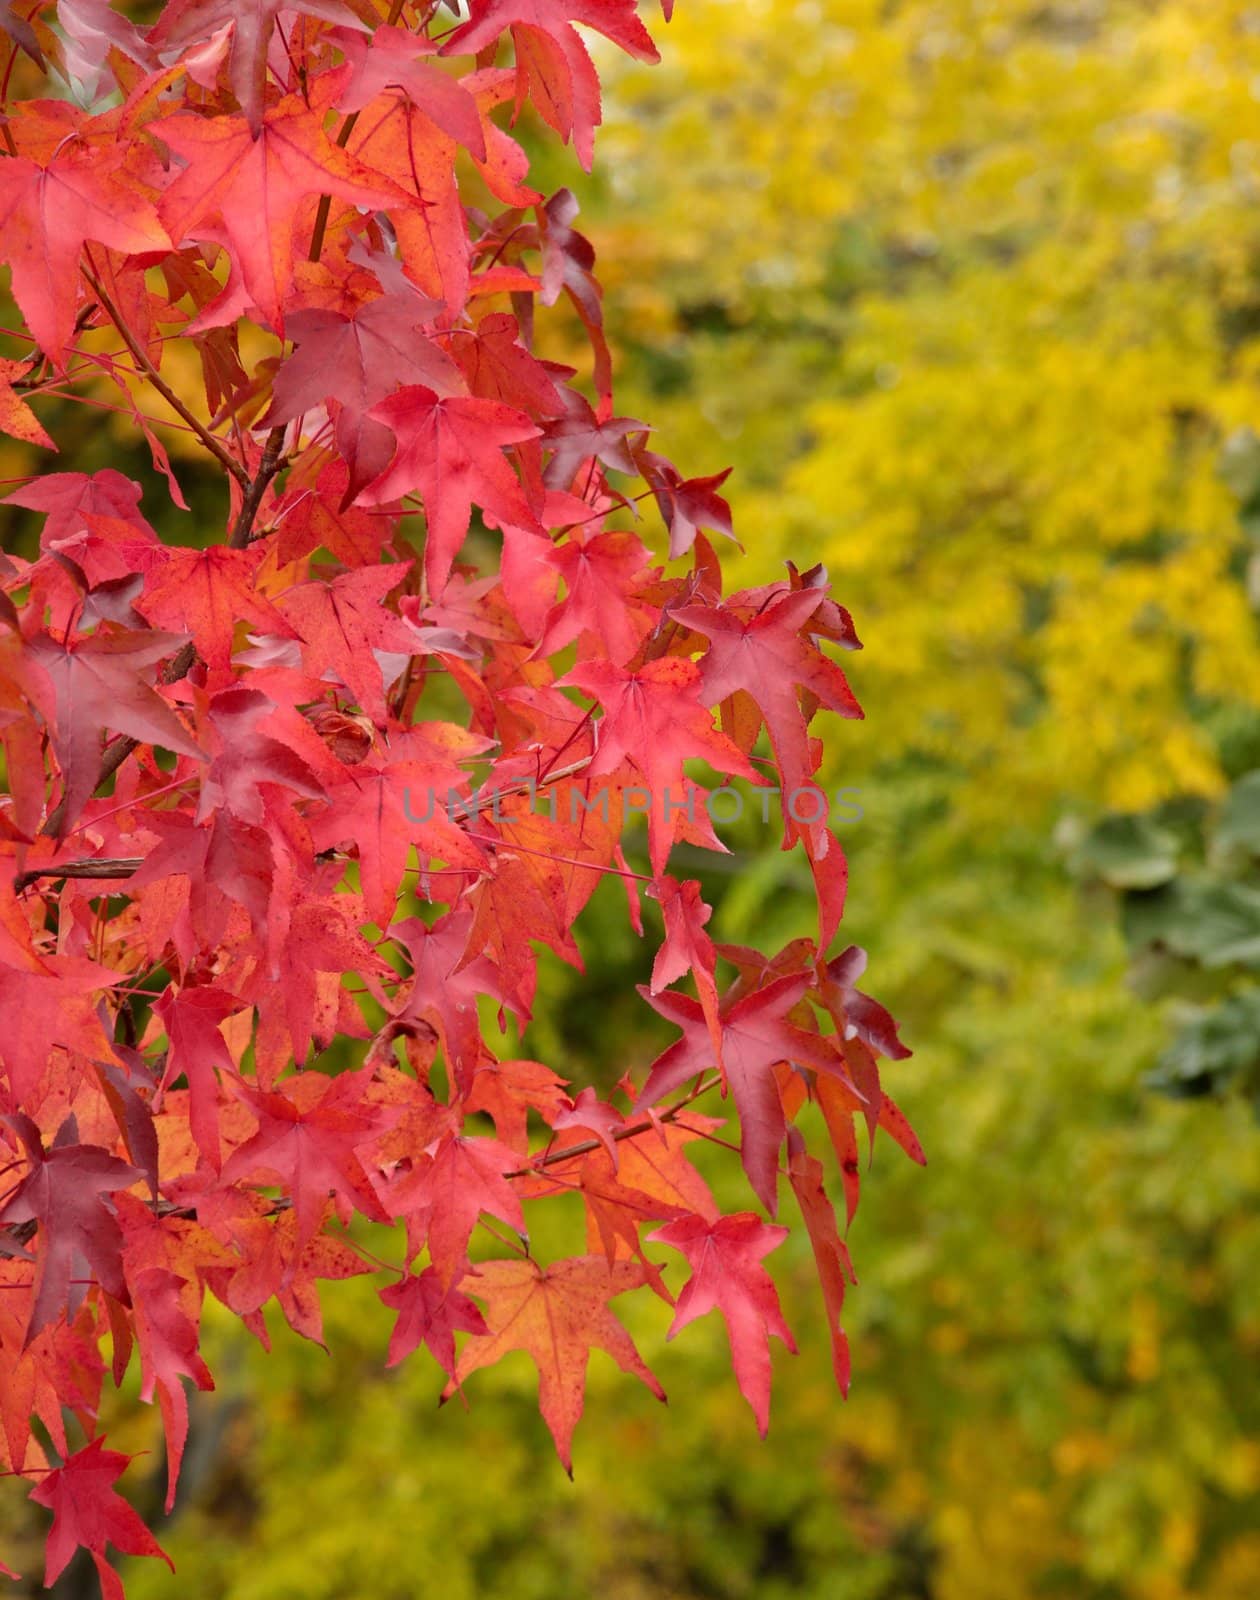 Red leaves in autumn foliage.